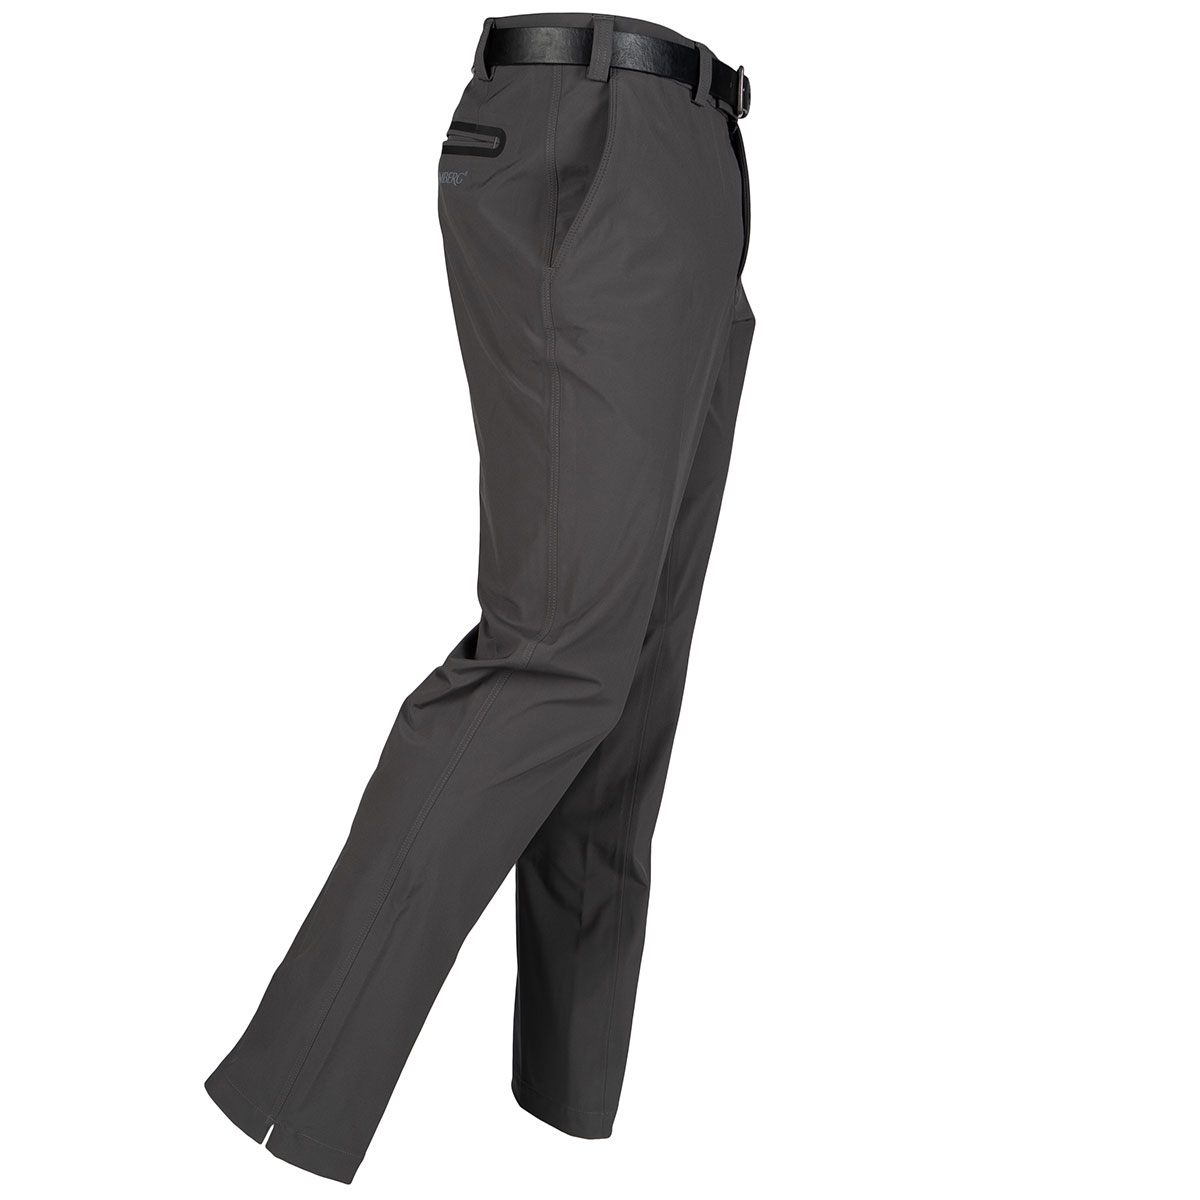 Stromberg Men's Weather Tech Stretch Golf Trousers from american golf